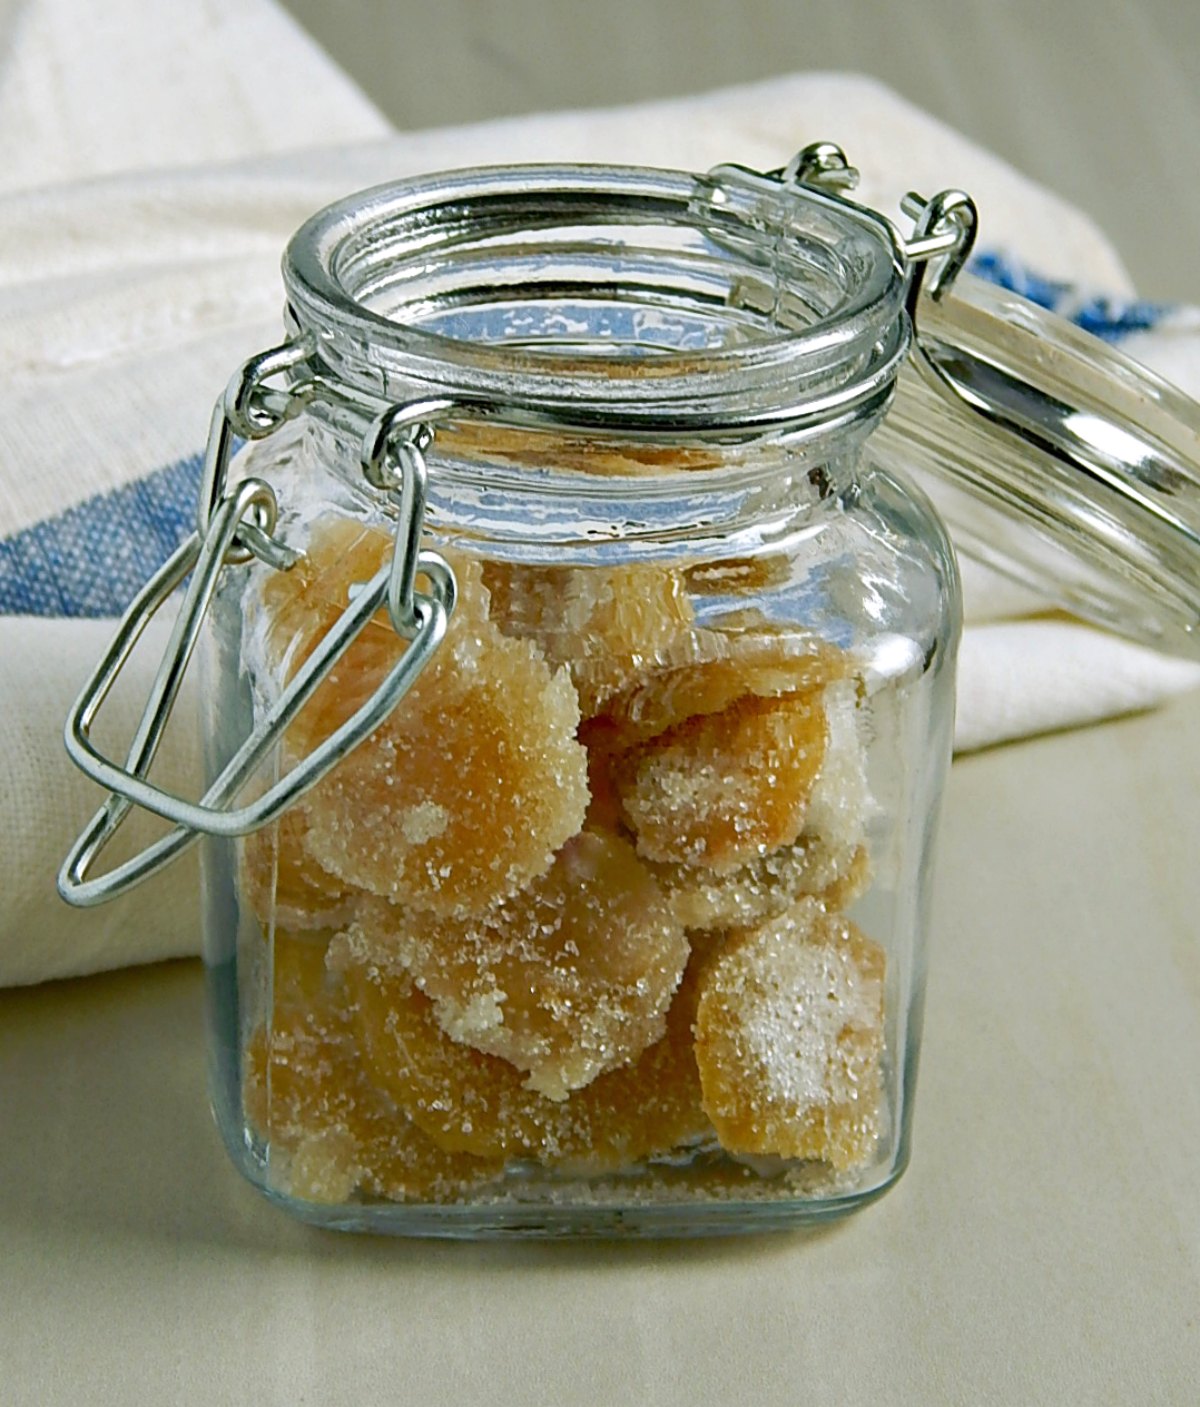 Homemade Crystallized Candied Ginger